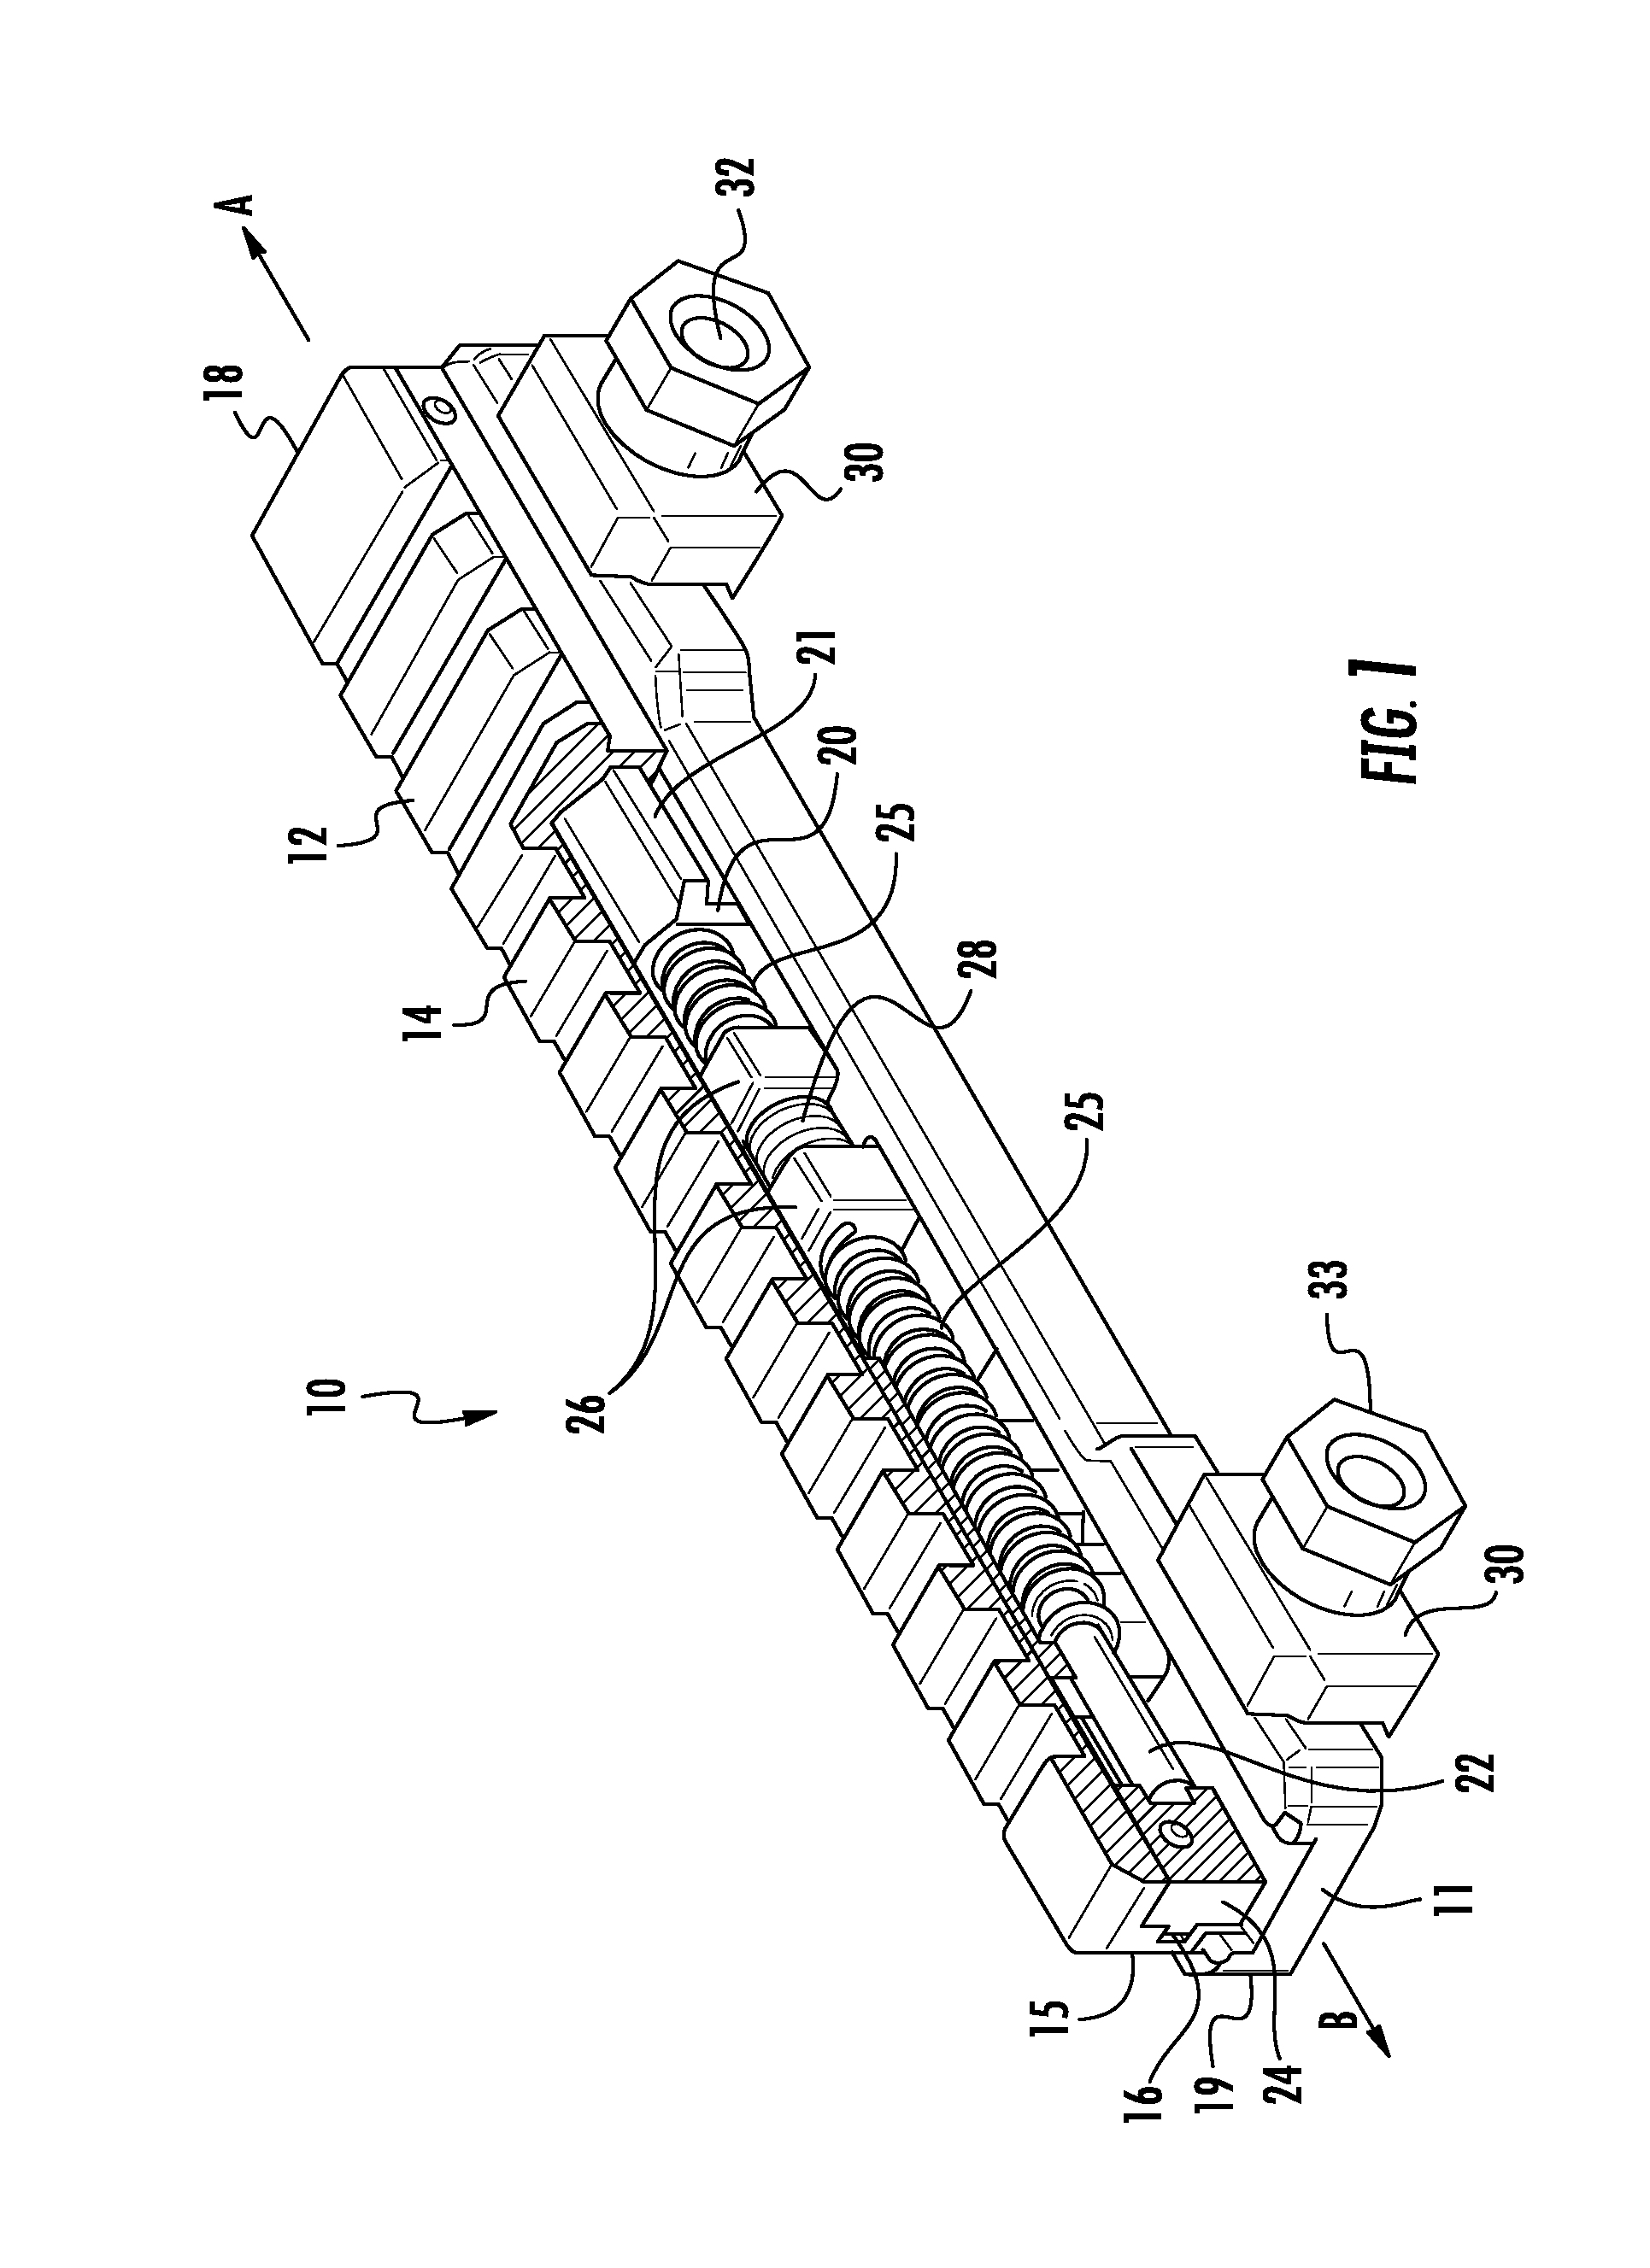 Recoil force mitigating device for firearms